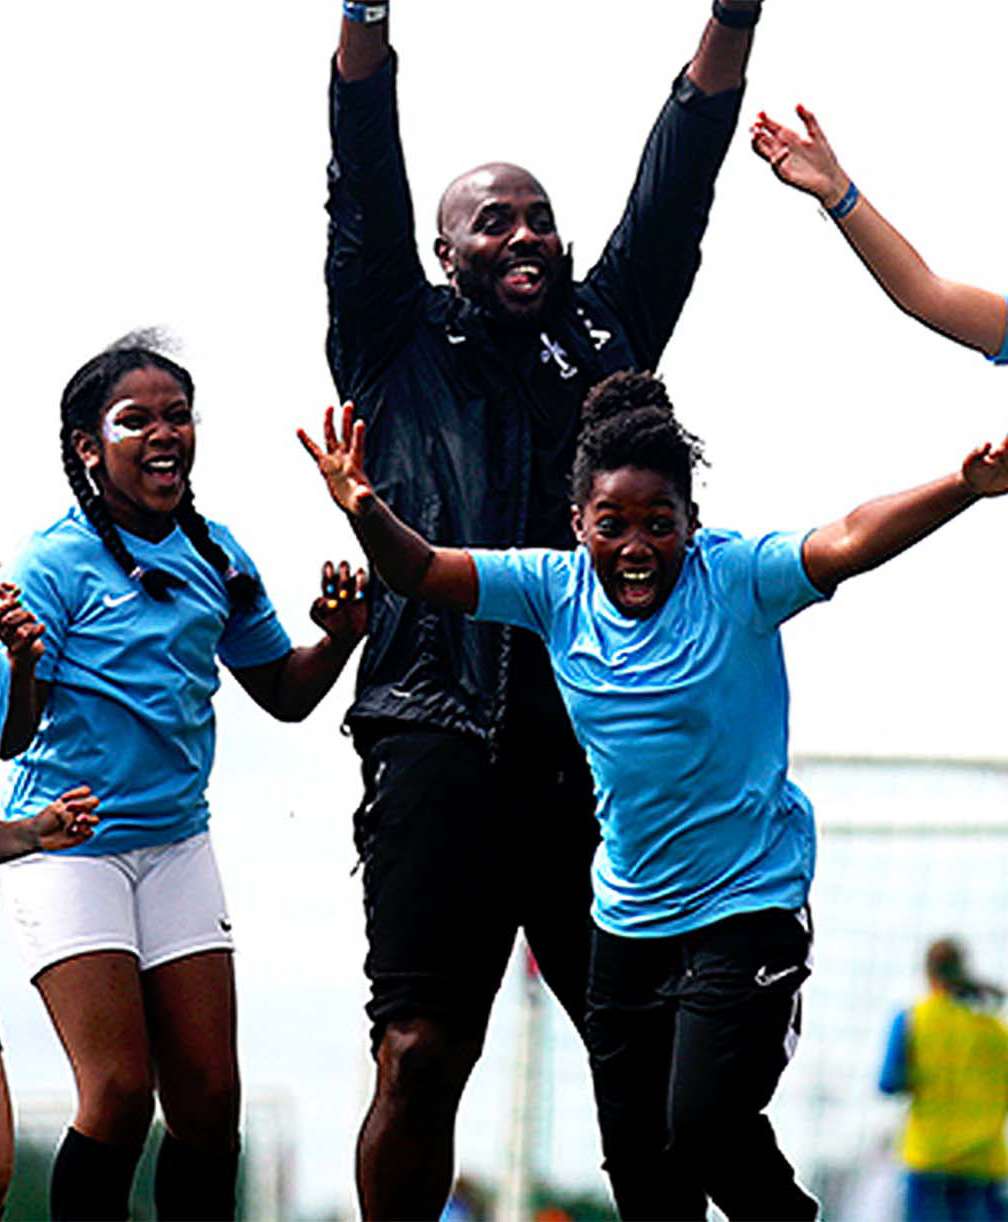 7 children stand in front of a man, all celebrating with their hands in the air. The children wear blue football tops and the man wears a black tracksuit